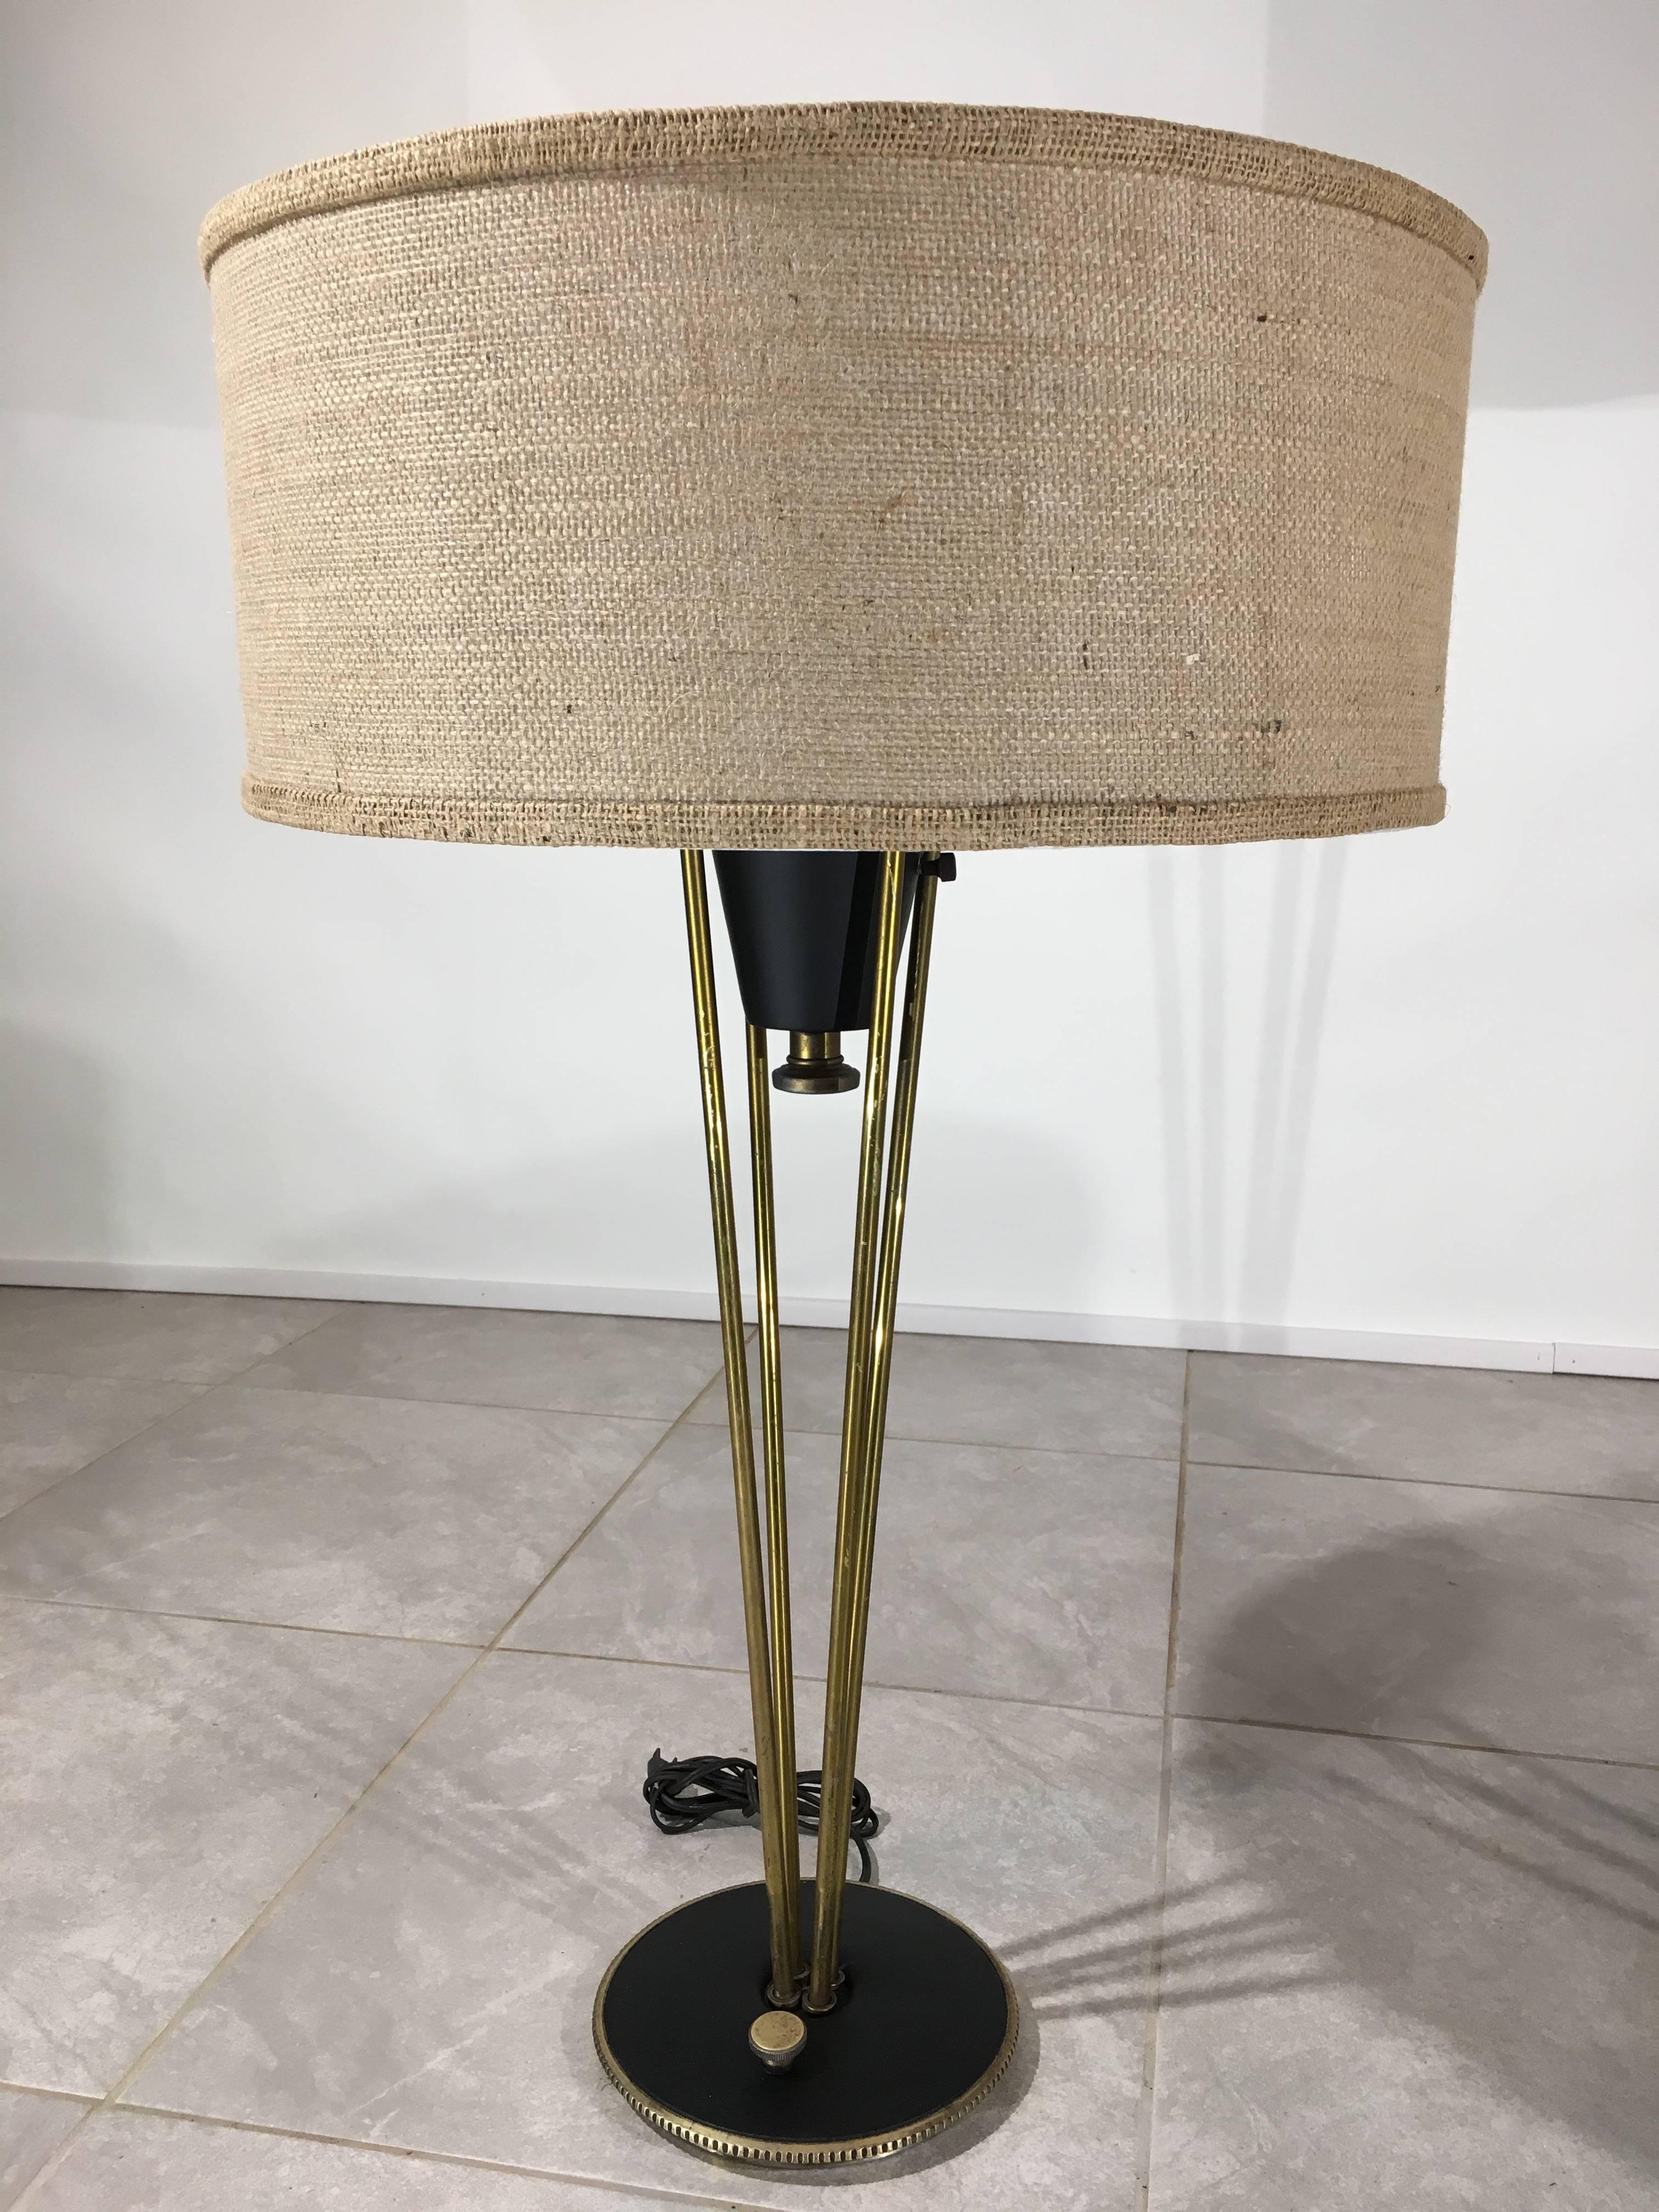 An attractive pair of vintage atomic era rocket lamps having brass stems and ebonized steel bases with solid brass turn switches. 
Shades have been recently re-wrapped with burlap to maintain their original integrity. 
Very nice vintage condition.